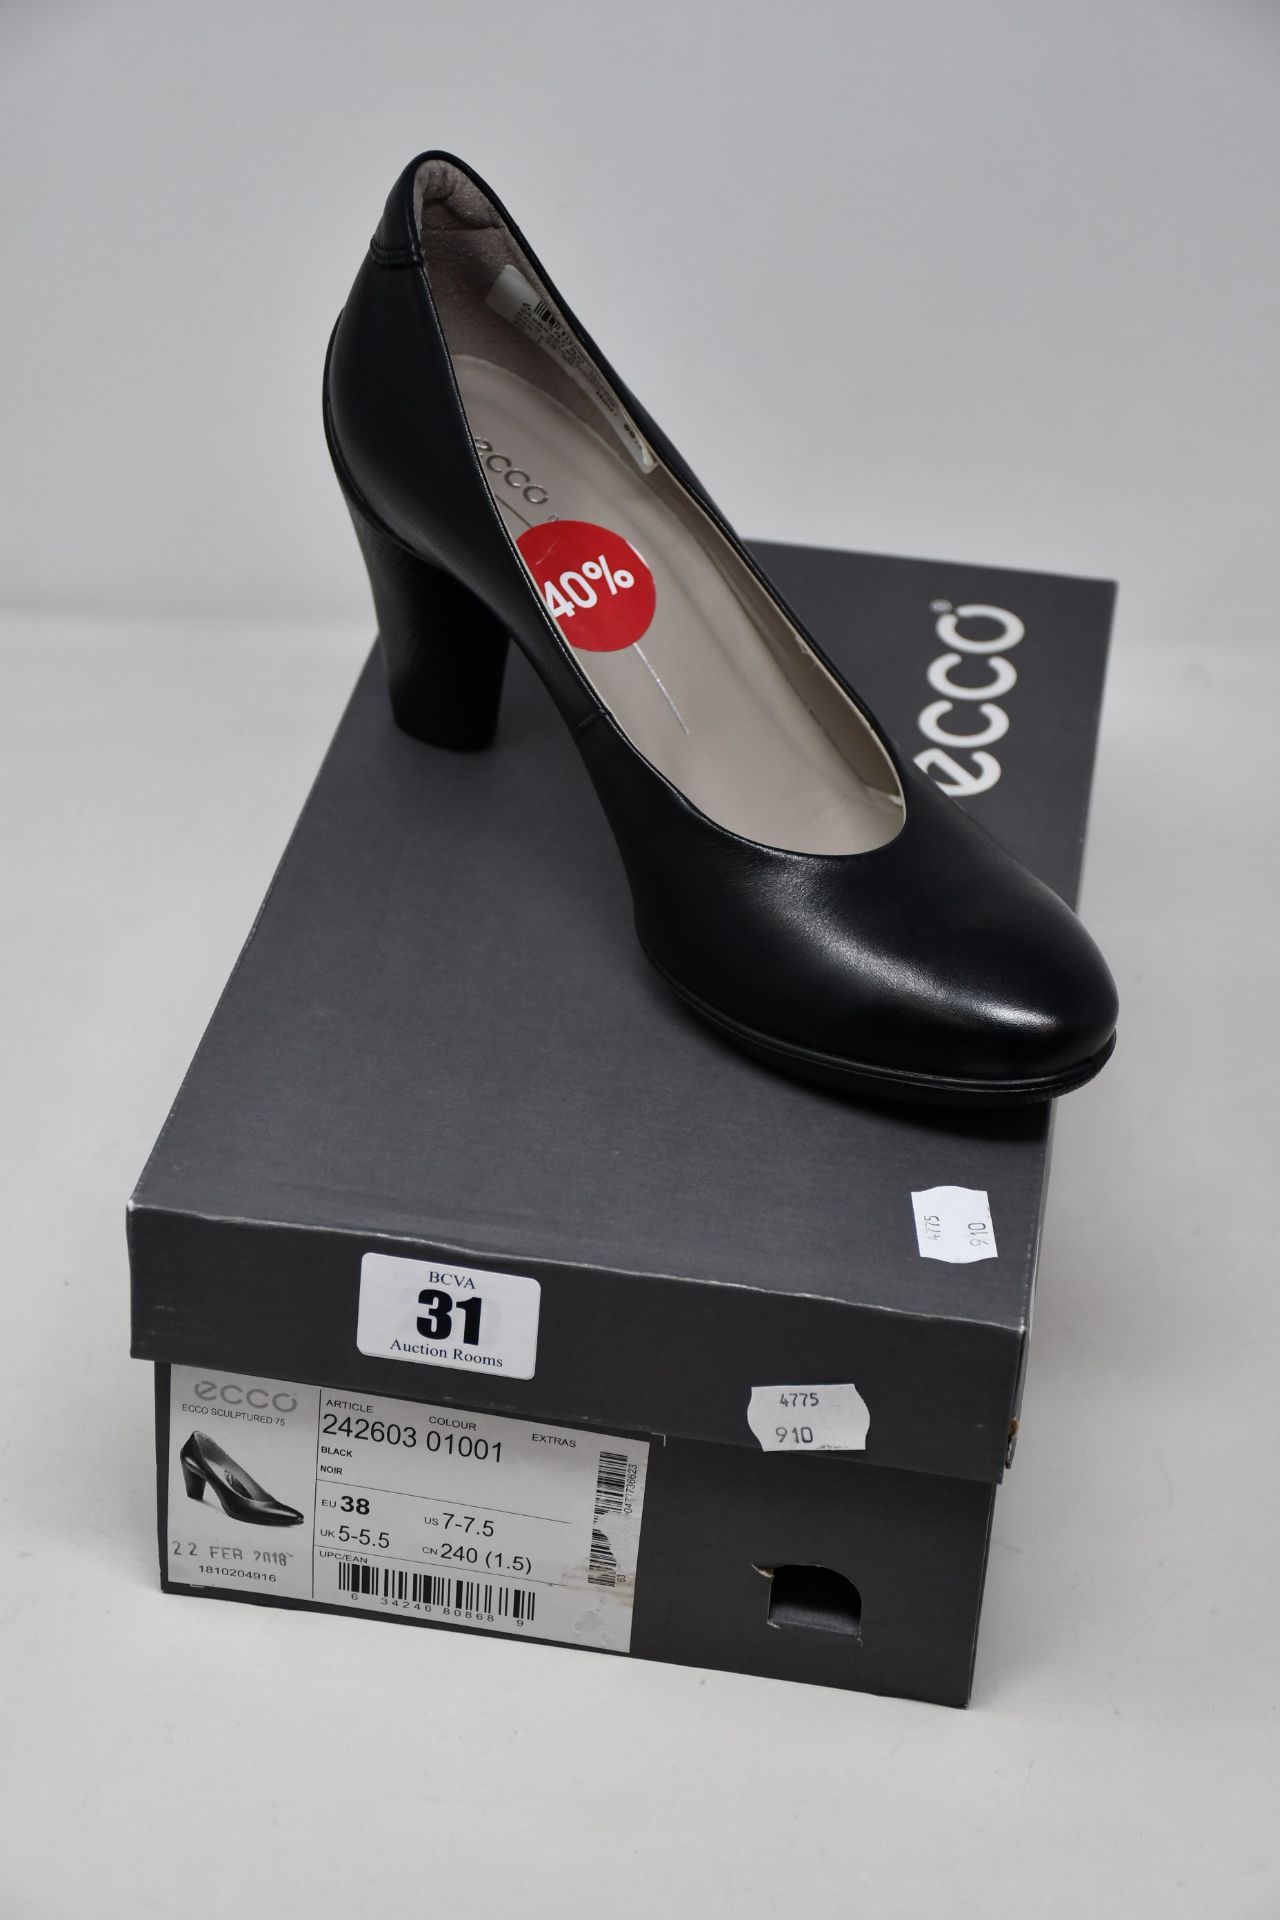 A pair of as new Ecco Sculptured 75 shoes (UK 7 - 7.5).